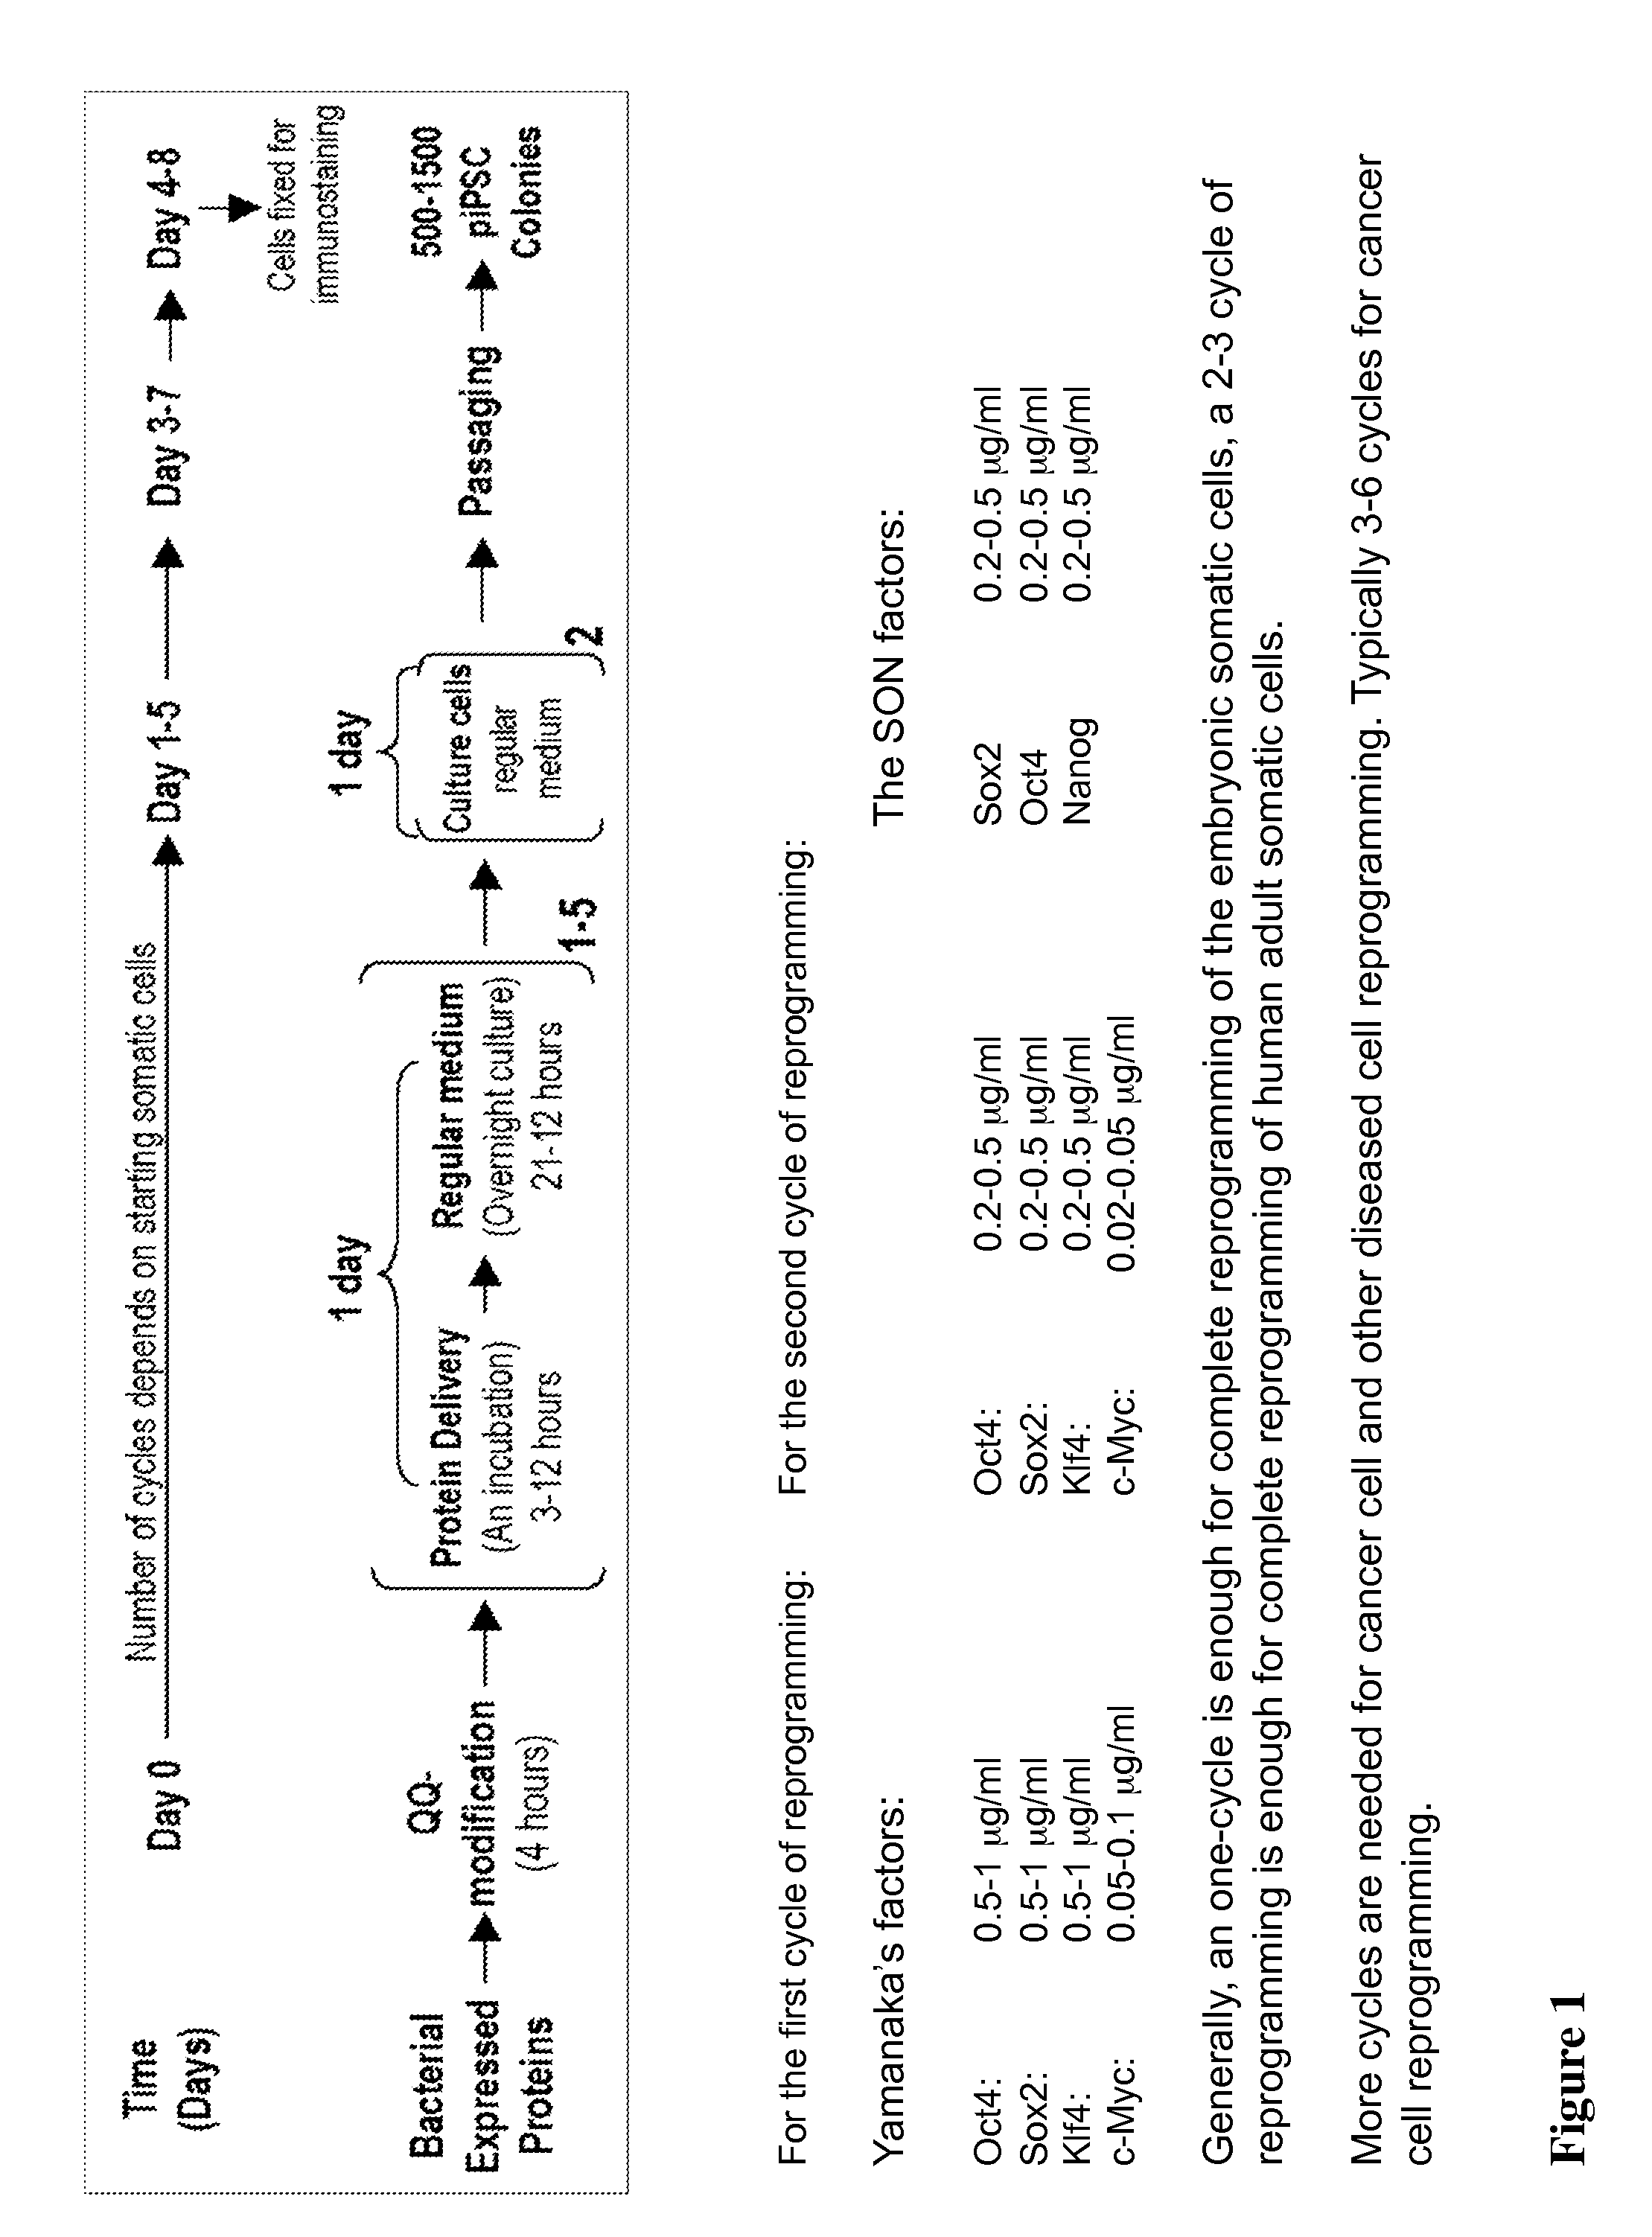 Protein-induced pluripotent cell technology and uses thereof